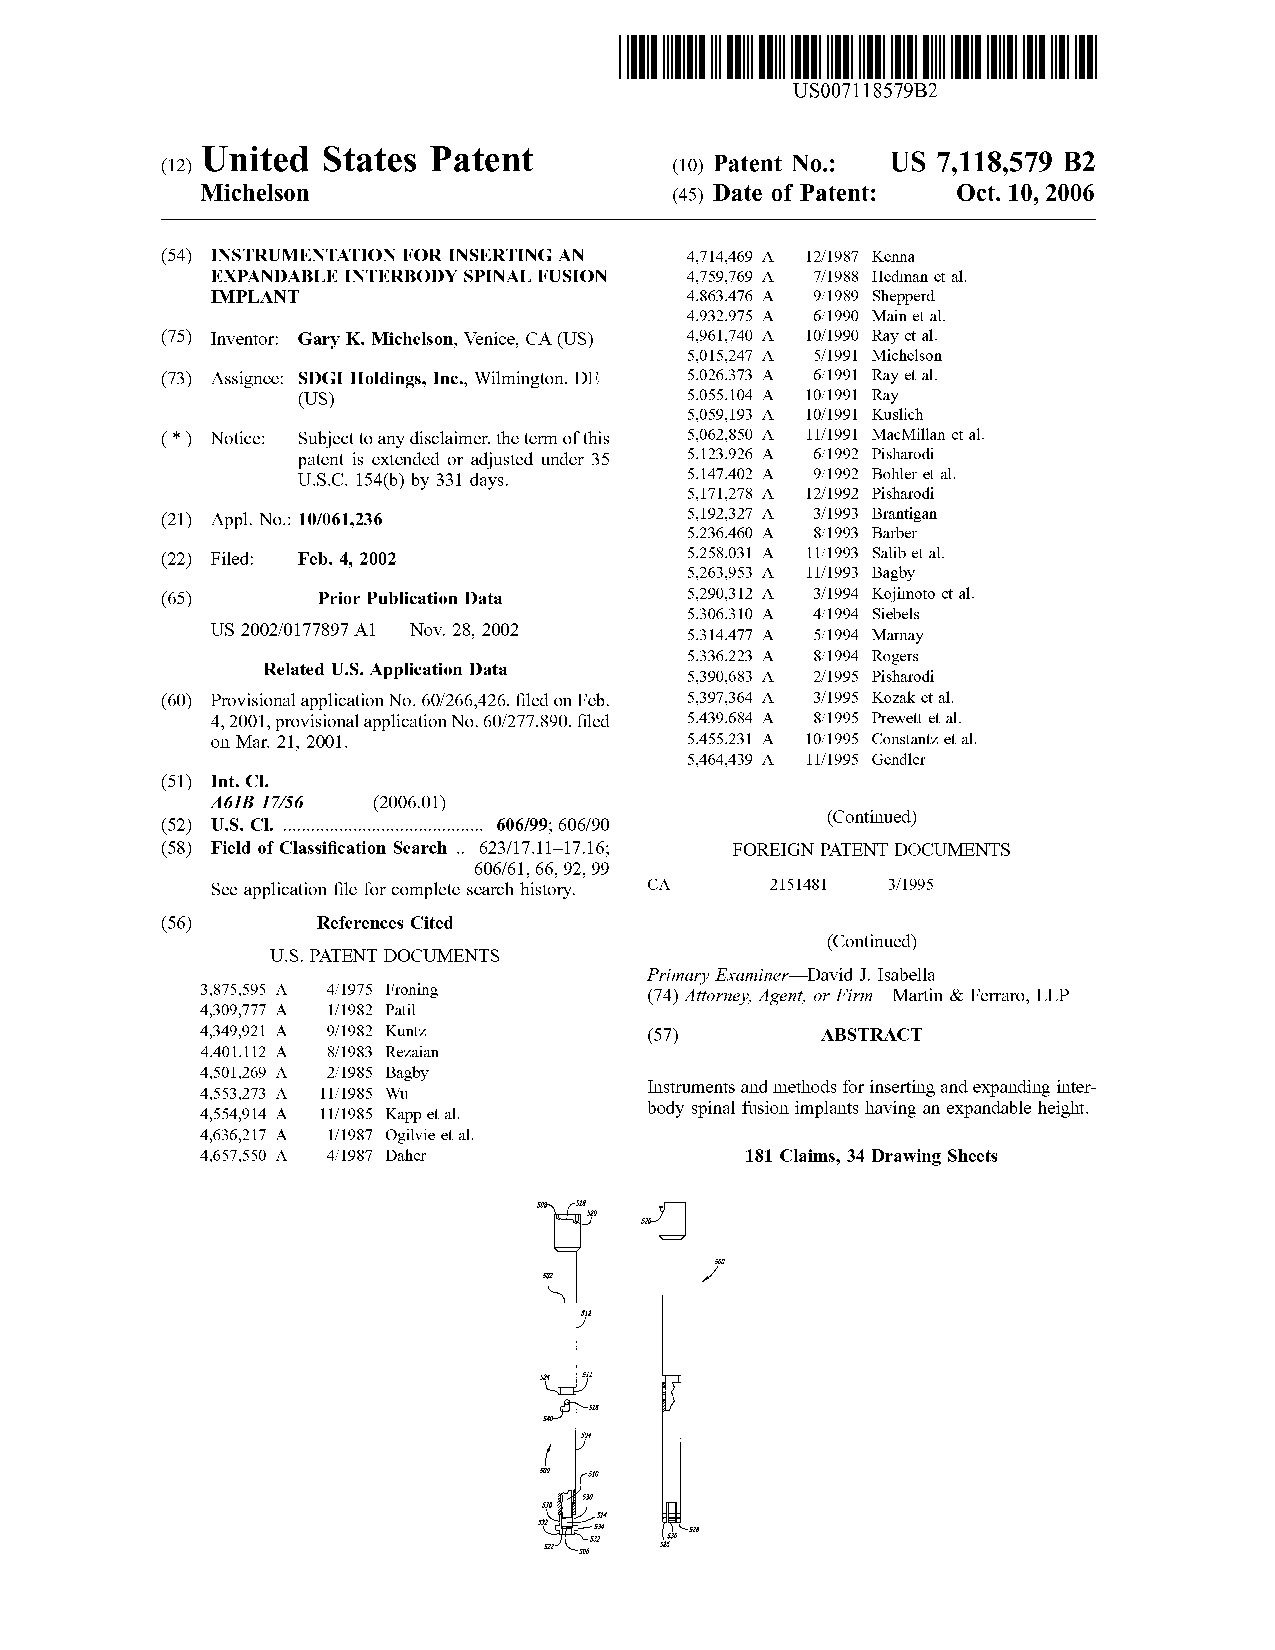 Instrumentation for inserting an expandable interbody spinal fusion     implant - Patent 7,118,579